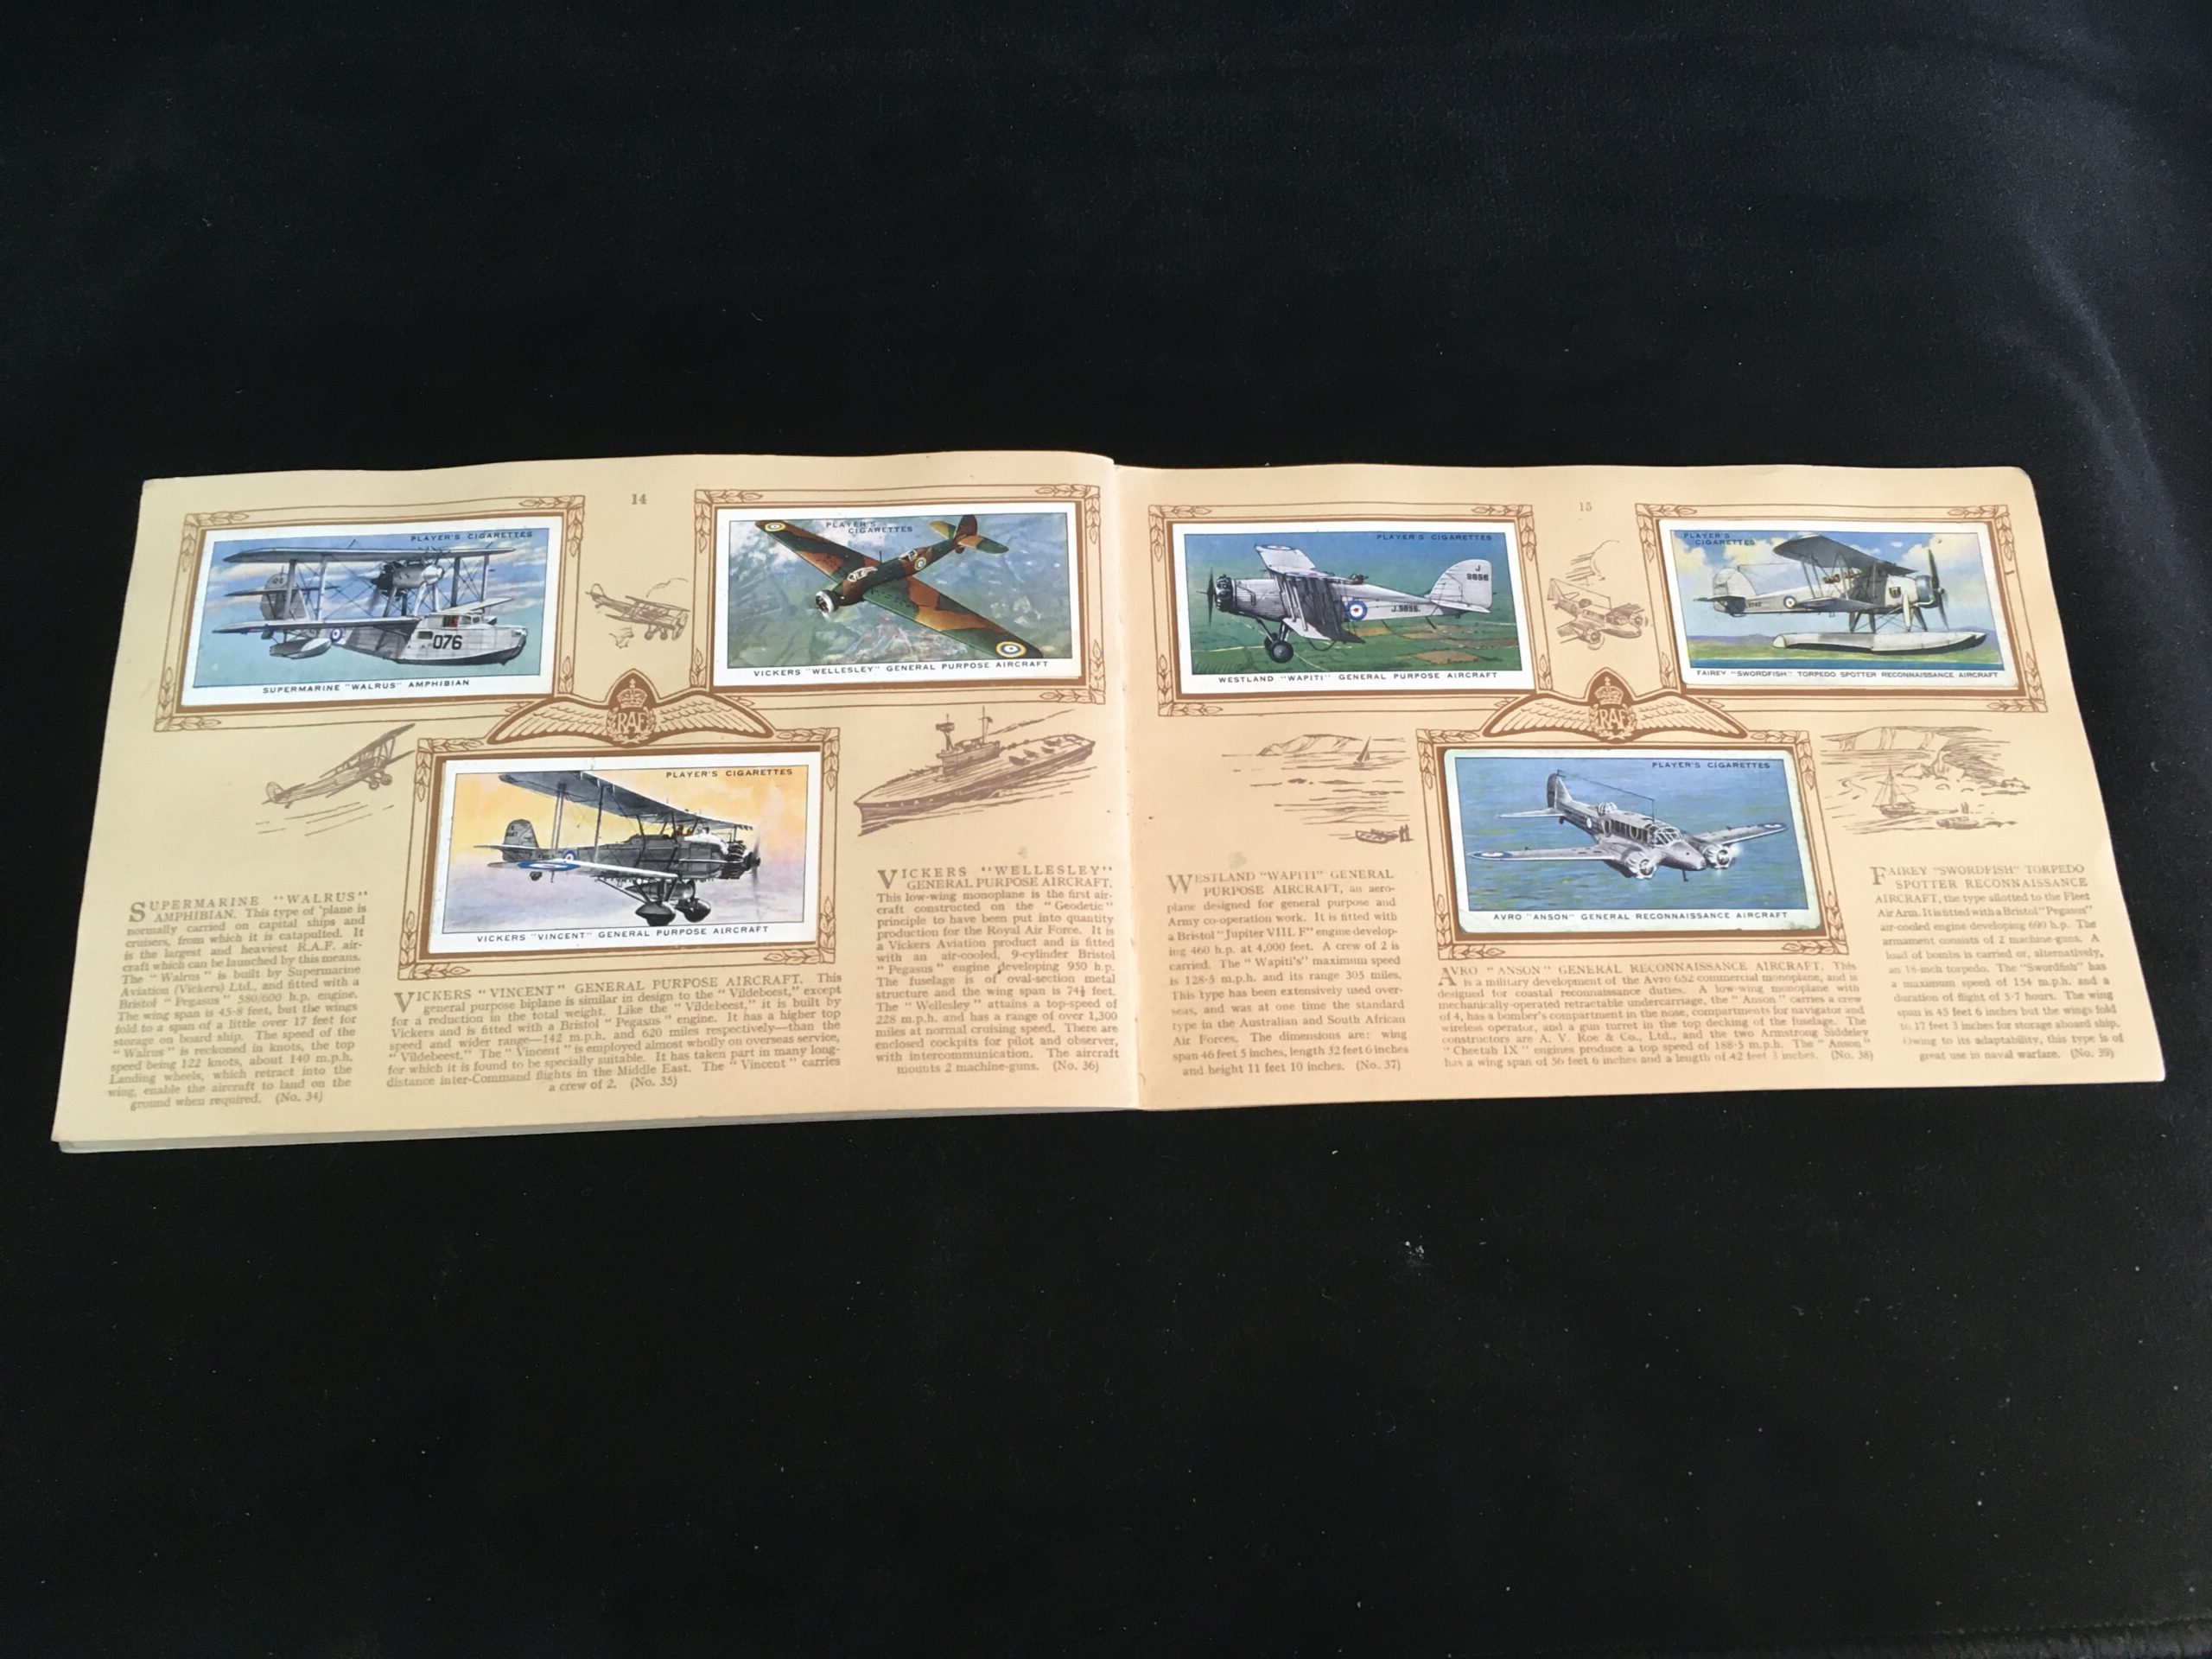 Aircraft of the Royal Air Force - 1938 - Cigarette cards | Trade cards ...